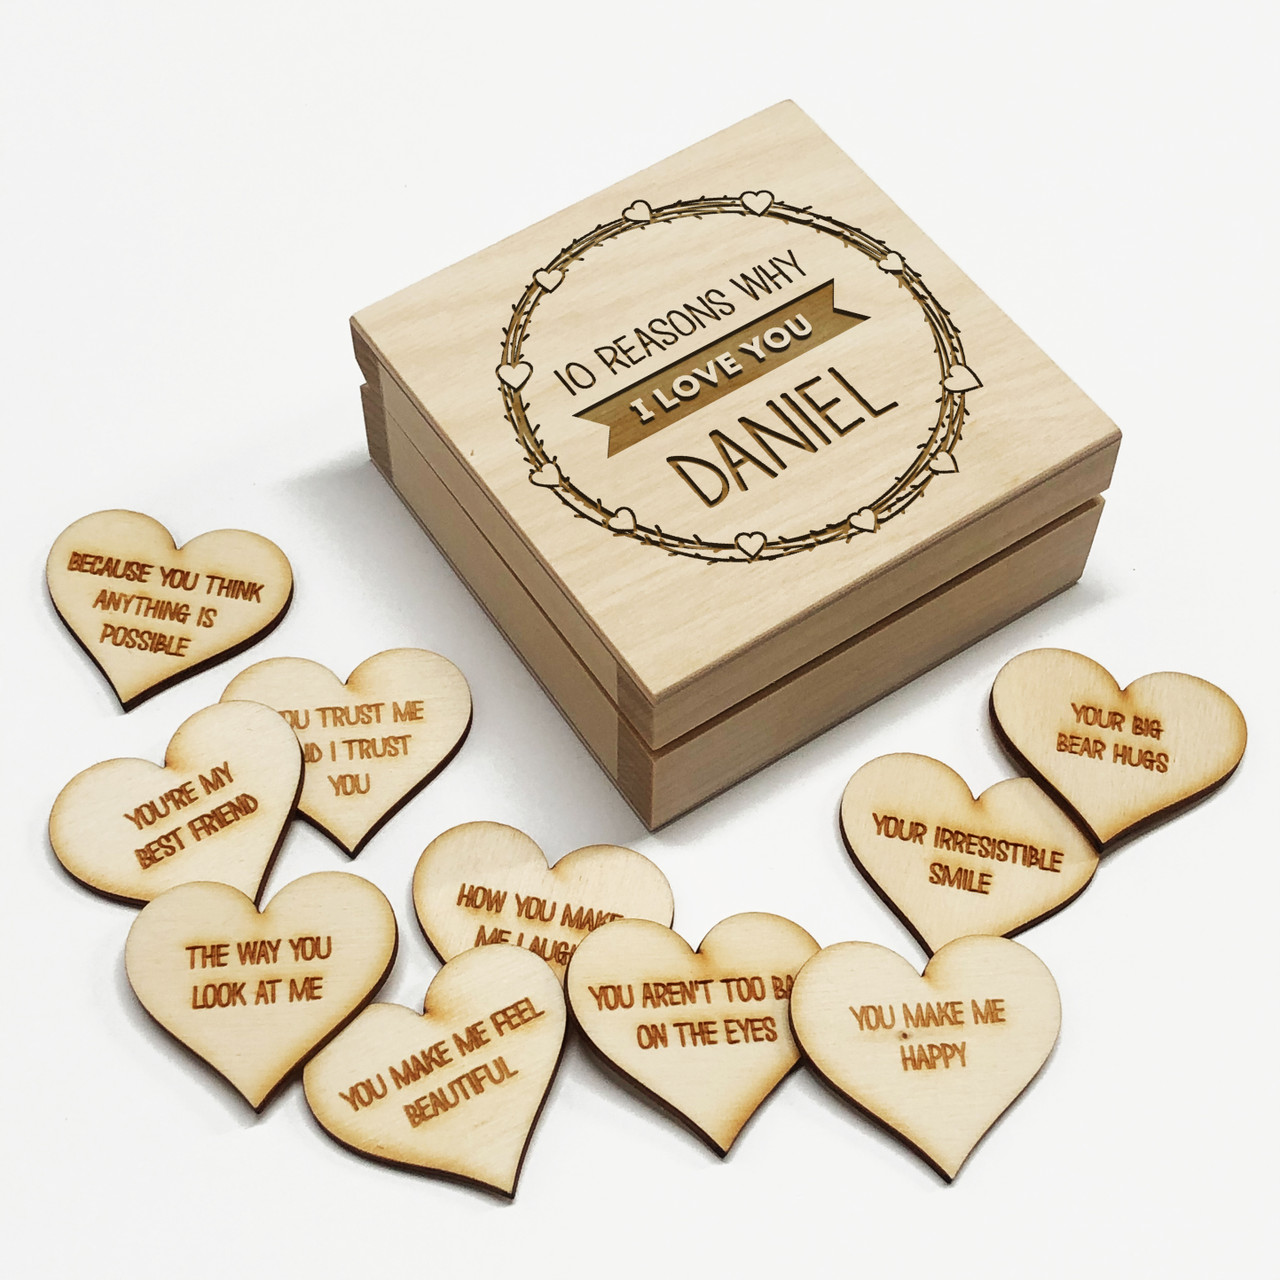 10 Reasons Why I Love You Wooden Box And Hearts Personalised Valentine S Day Gift